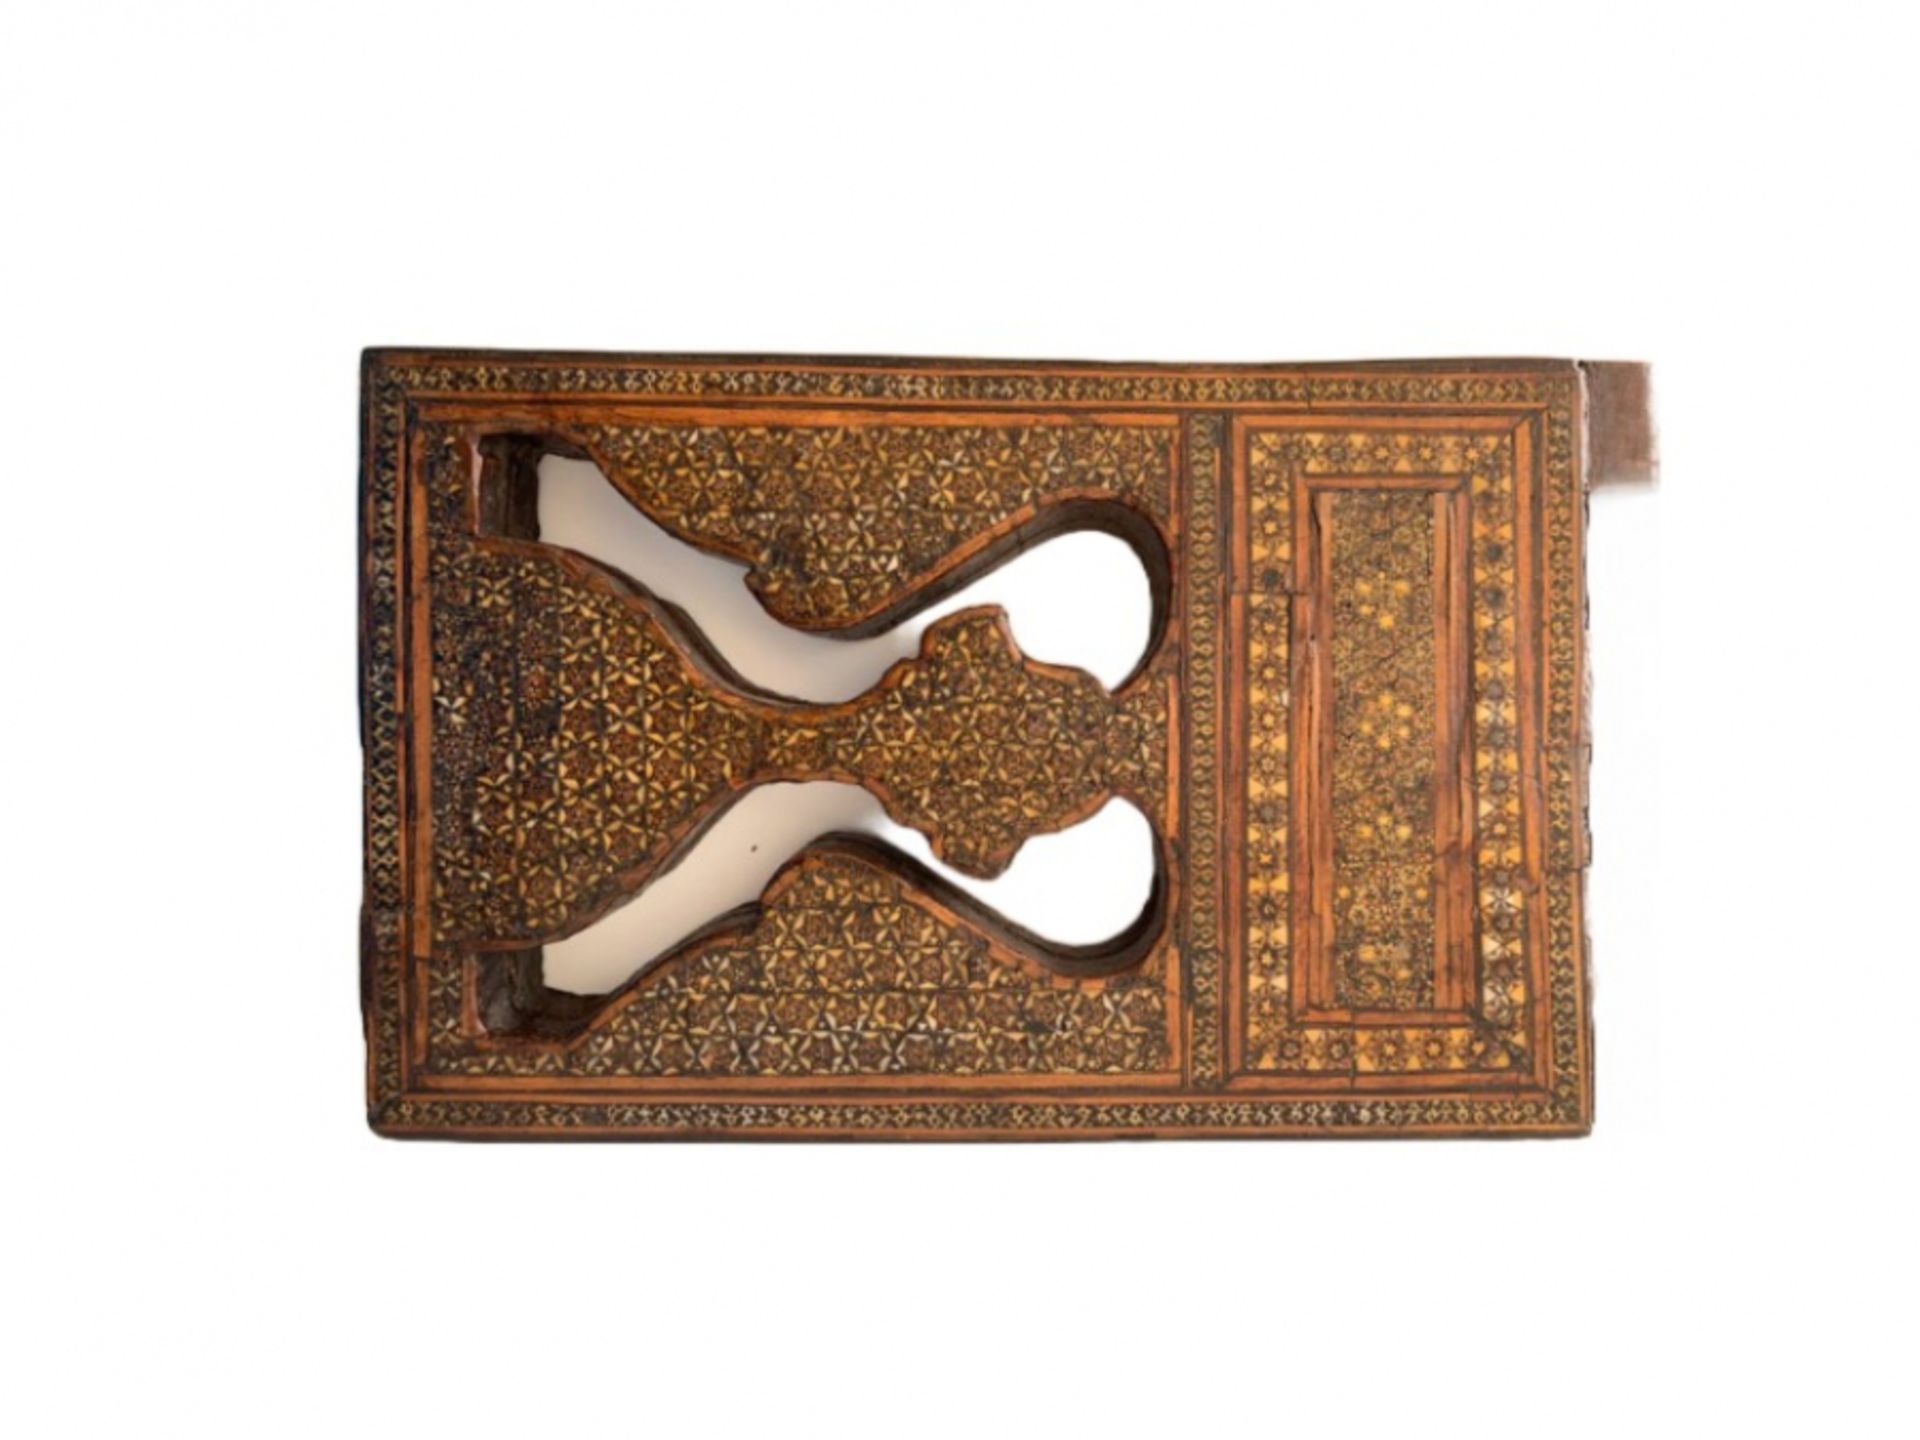 Beautifully decorated Ottoman Quran holder - Image 5 of 6